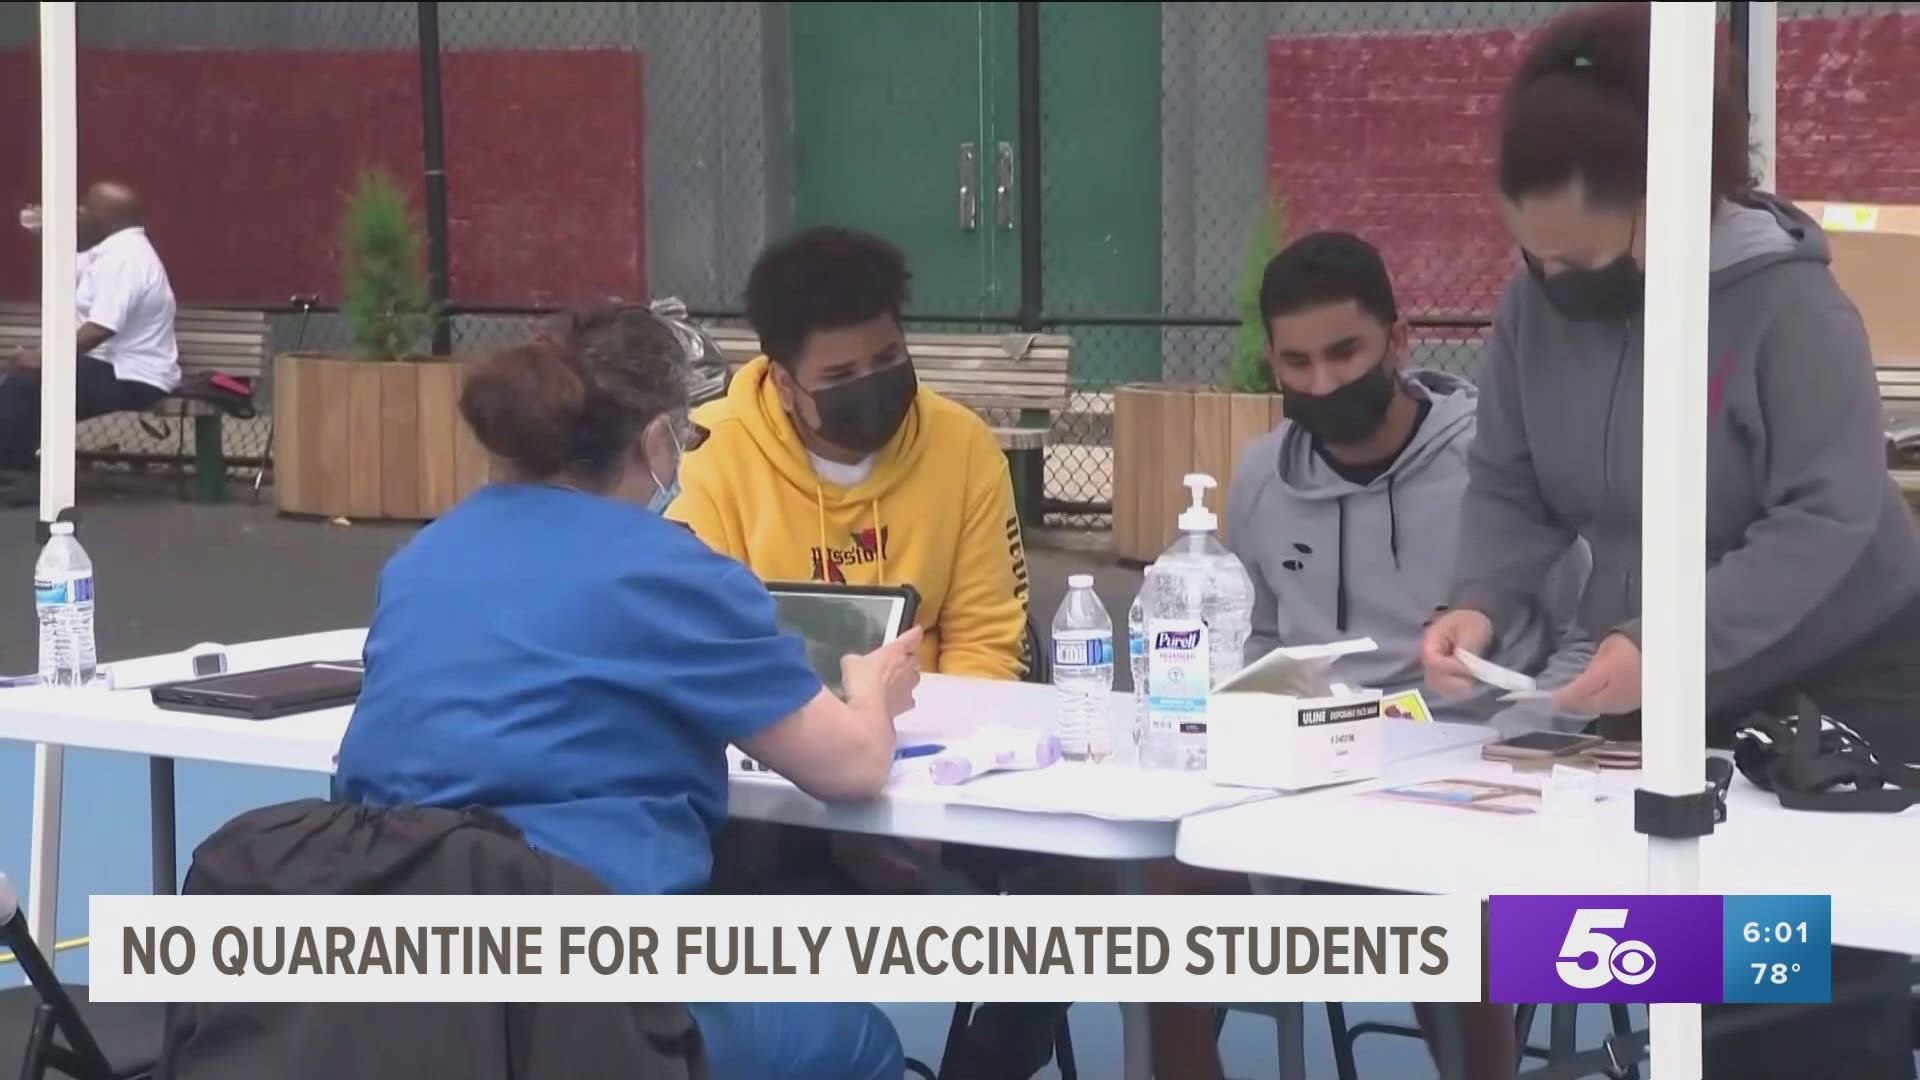 The Arkansas Department of Health will be doing outreach programs over the summer in hopes to get more teens vaccinated.